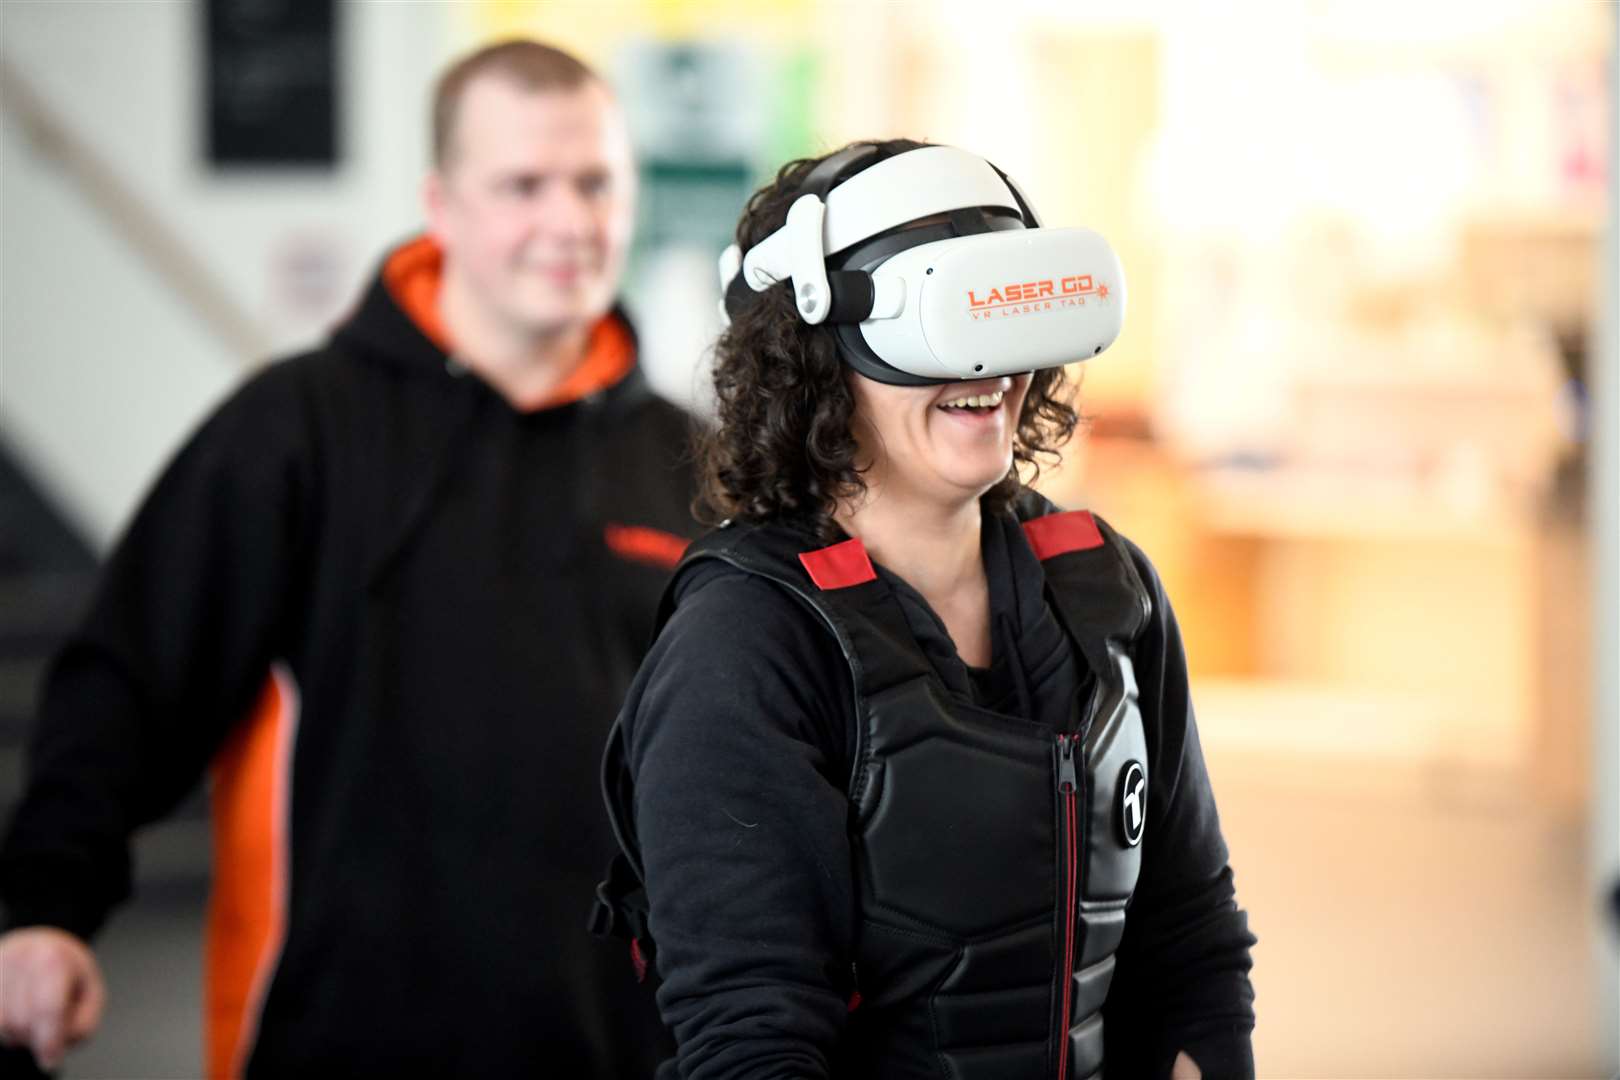 Maria Belen Simon Andino trying Laser Go VR laser tag. Picture: James Mackenzie.